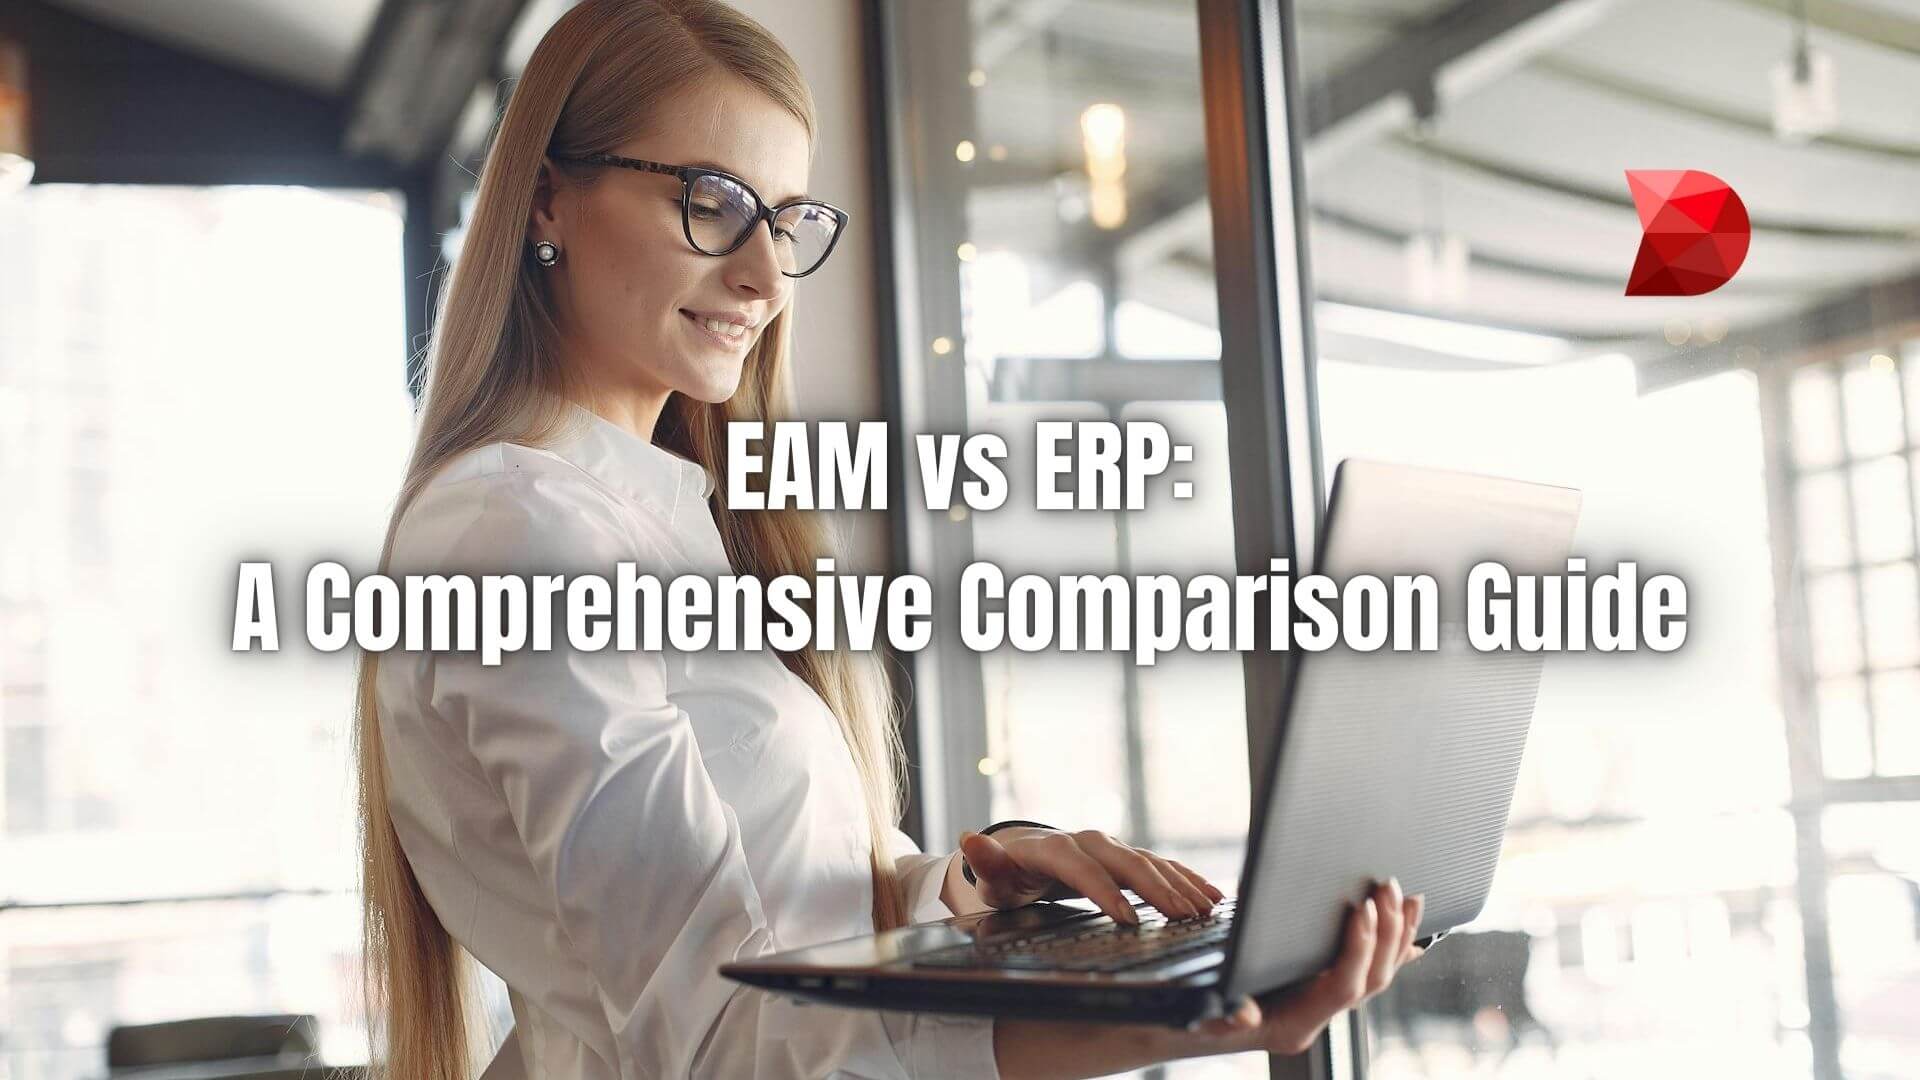 Maximize efficiency with our guide to EAM vs. ERP. Learn how these systems differ and choose the right fit for your organization.